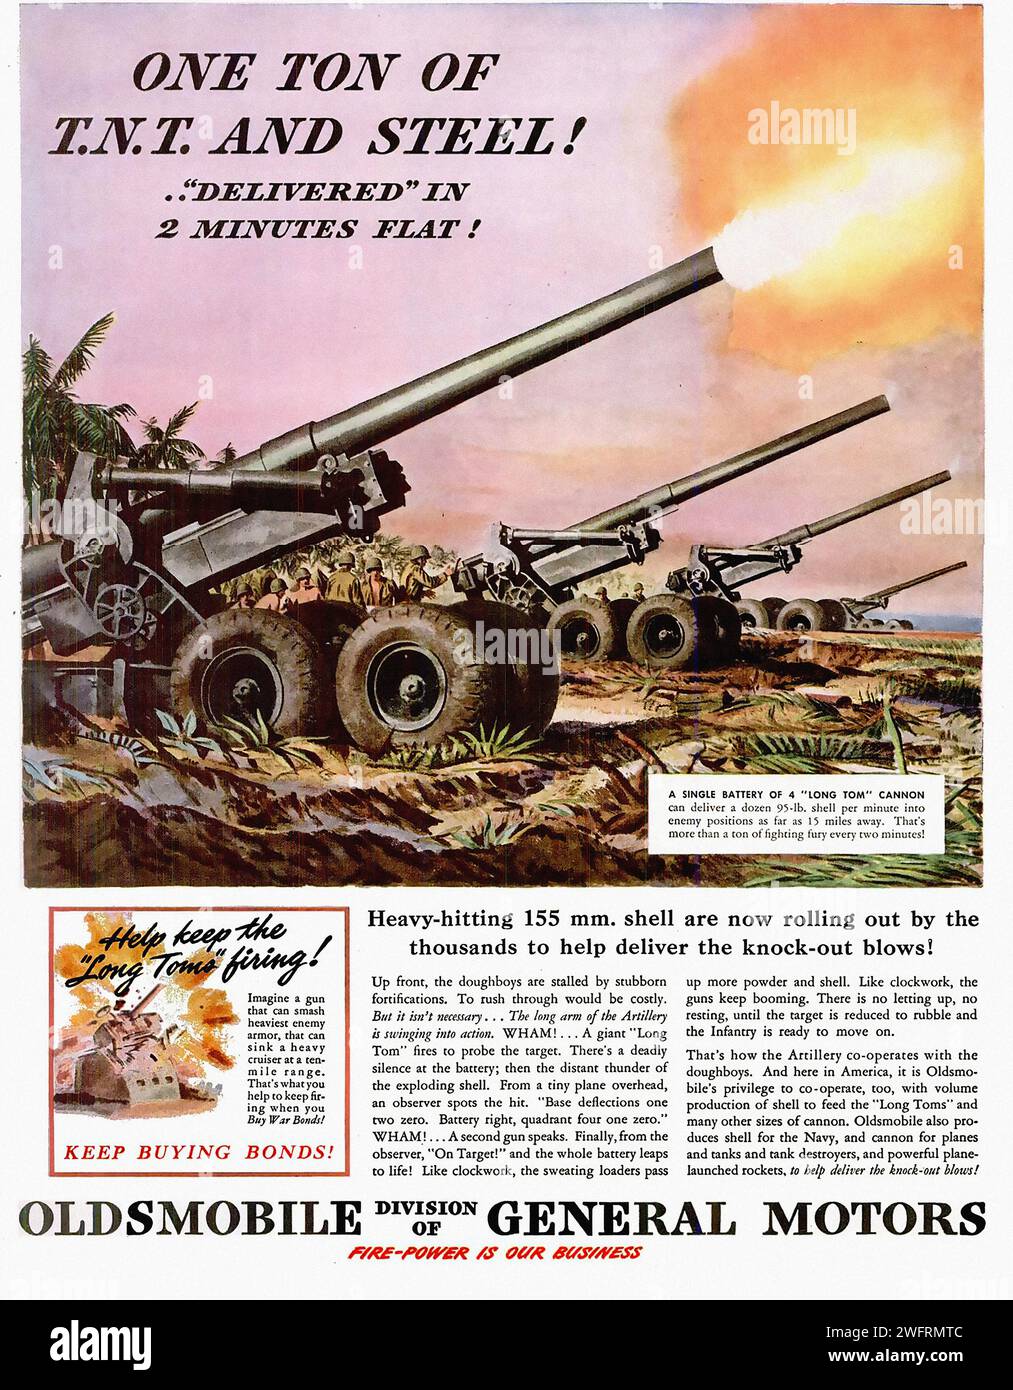 ONE OF OUR ADVERTISERS “DELIVERED” IN 2 MINUTES FLAT! T.N.T. AND STEEL! Heavy-hitting 155 mm. shell guns are now rolling out by the thousands to help deliver the knock-out blows! Oldsmobile, in cooperation with the U.S. Army, is proud to  A vintage advertisement for Oldsmobile Division General Motors featuring a large artillery gun with a long barrel and a large explosion in the background. The gun is on a wheeled carriage and is being towed by a truck. The advertisement is promoting the purchase of war bonds to support the war effort. - American (U.S.) advertising, World War II era Stock Photo